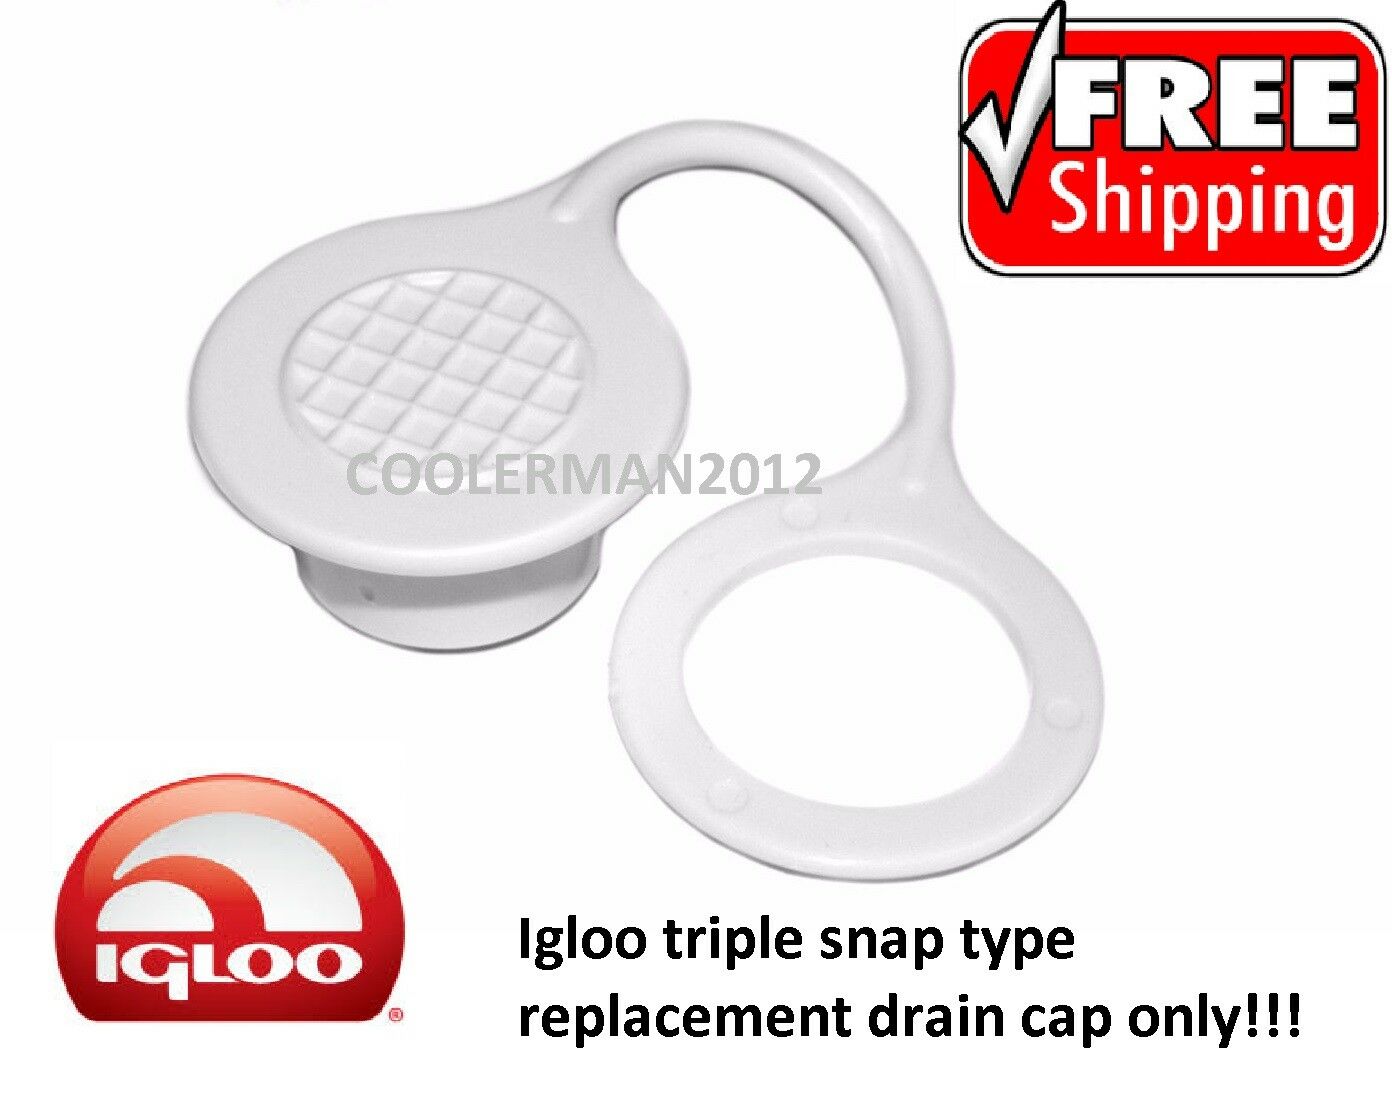 Igloo Triple Snap Drain Plug Cap Only! Cooler Standard Replacement Part Kit